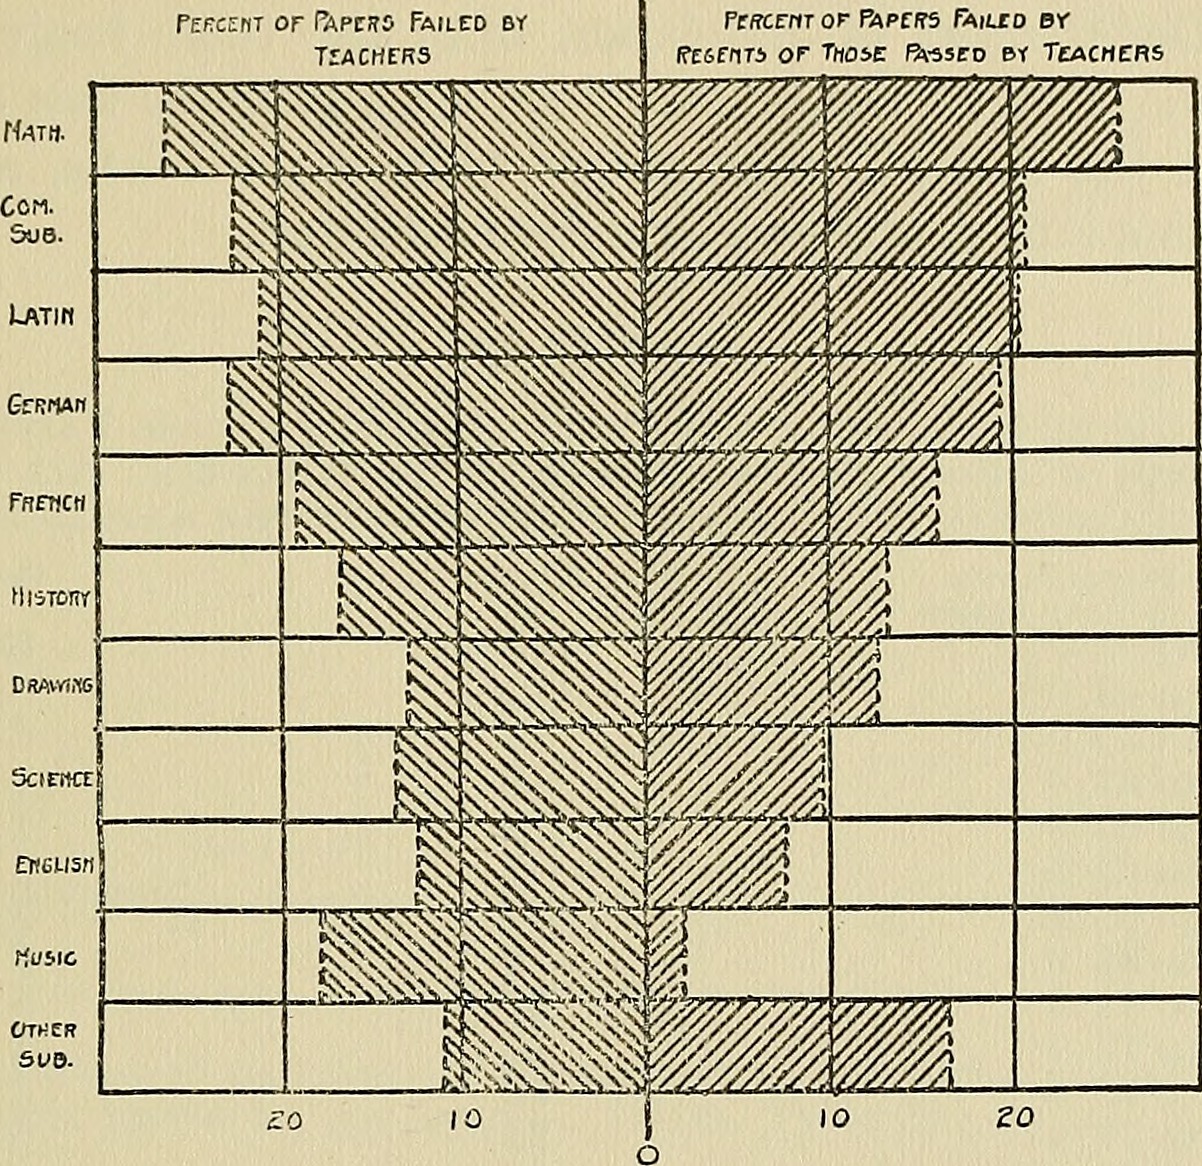 Image from page 74 of "Teachers' marks; their variability and standardization" (1914)